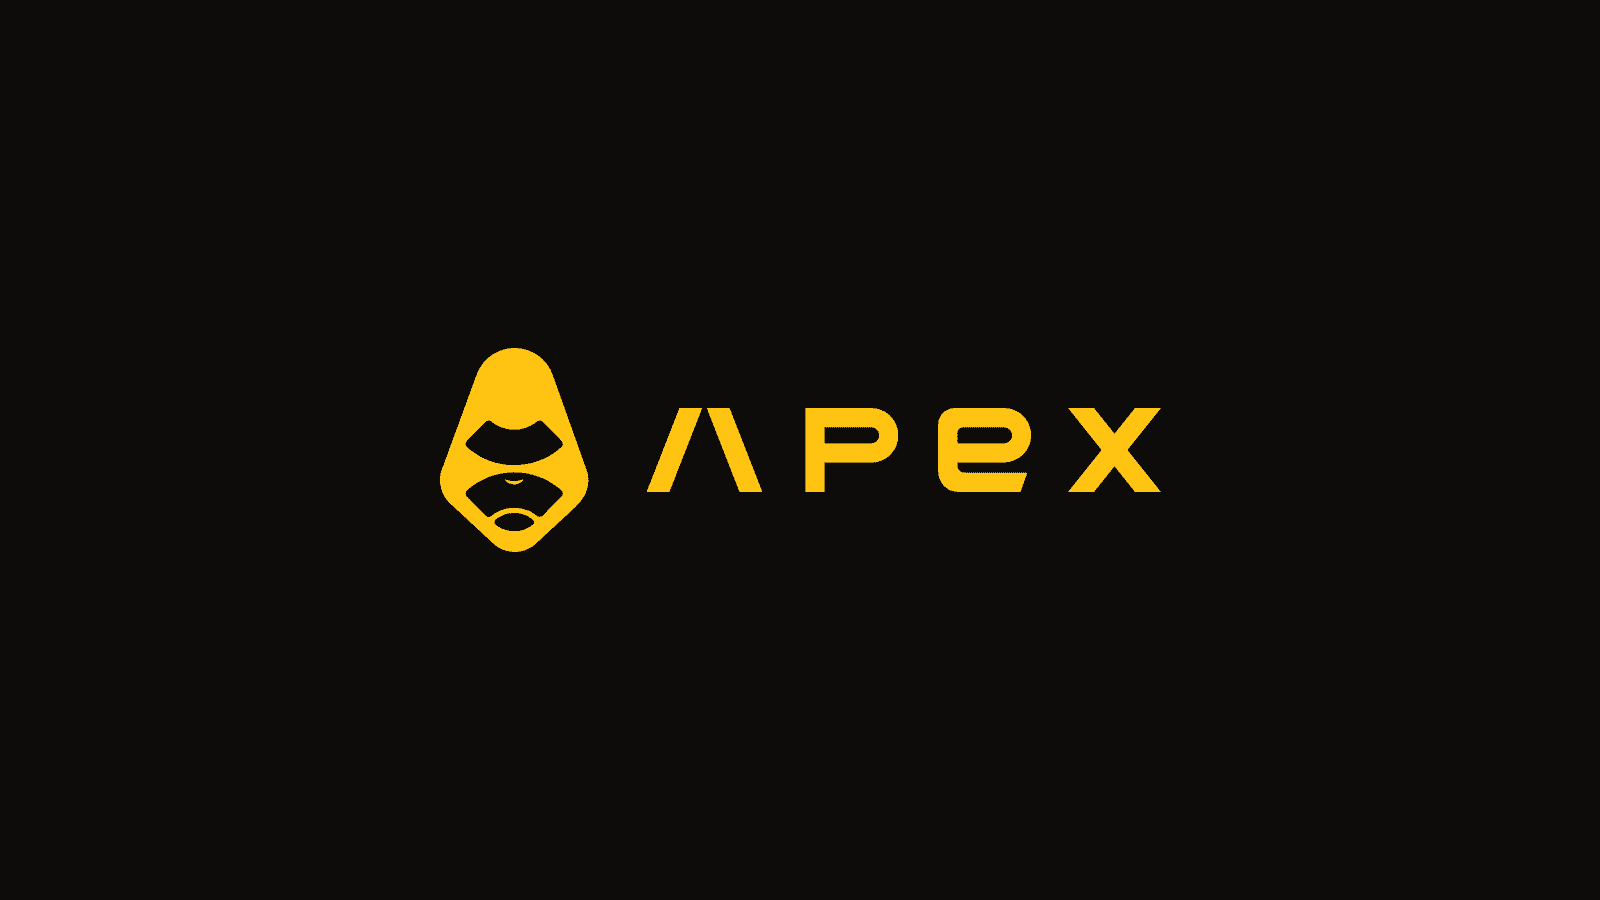 apex-logo-cover-1600-900.png